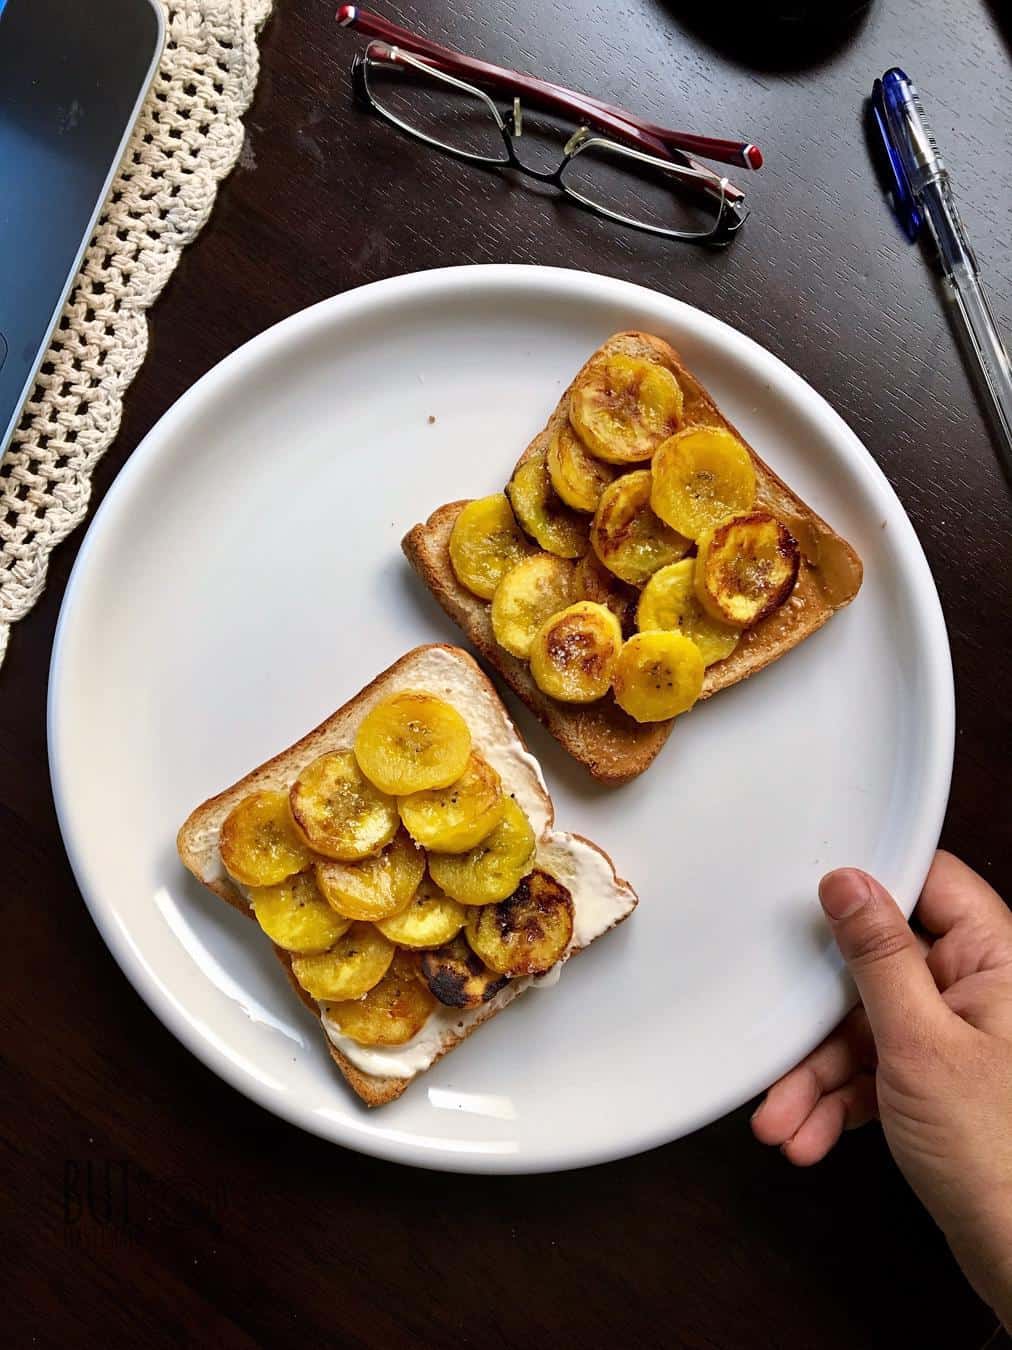 pan roasted ripe plantains neatly arranged over the bed of two toasted sliced bread with labneh. They are placed on a round white plate beside a spectacle and pen.